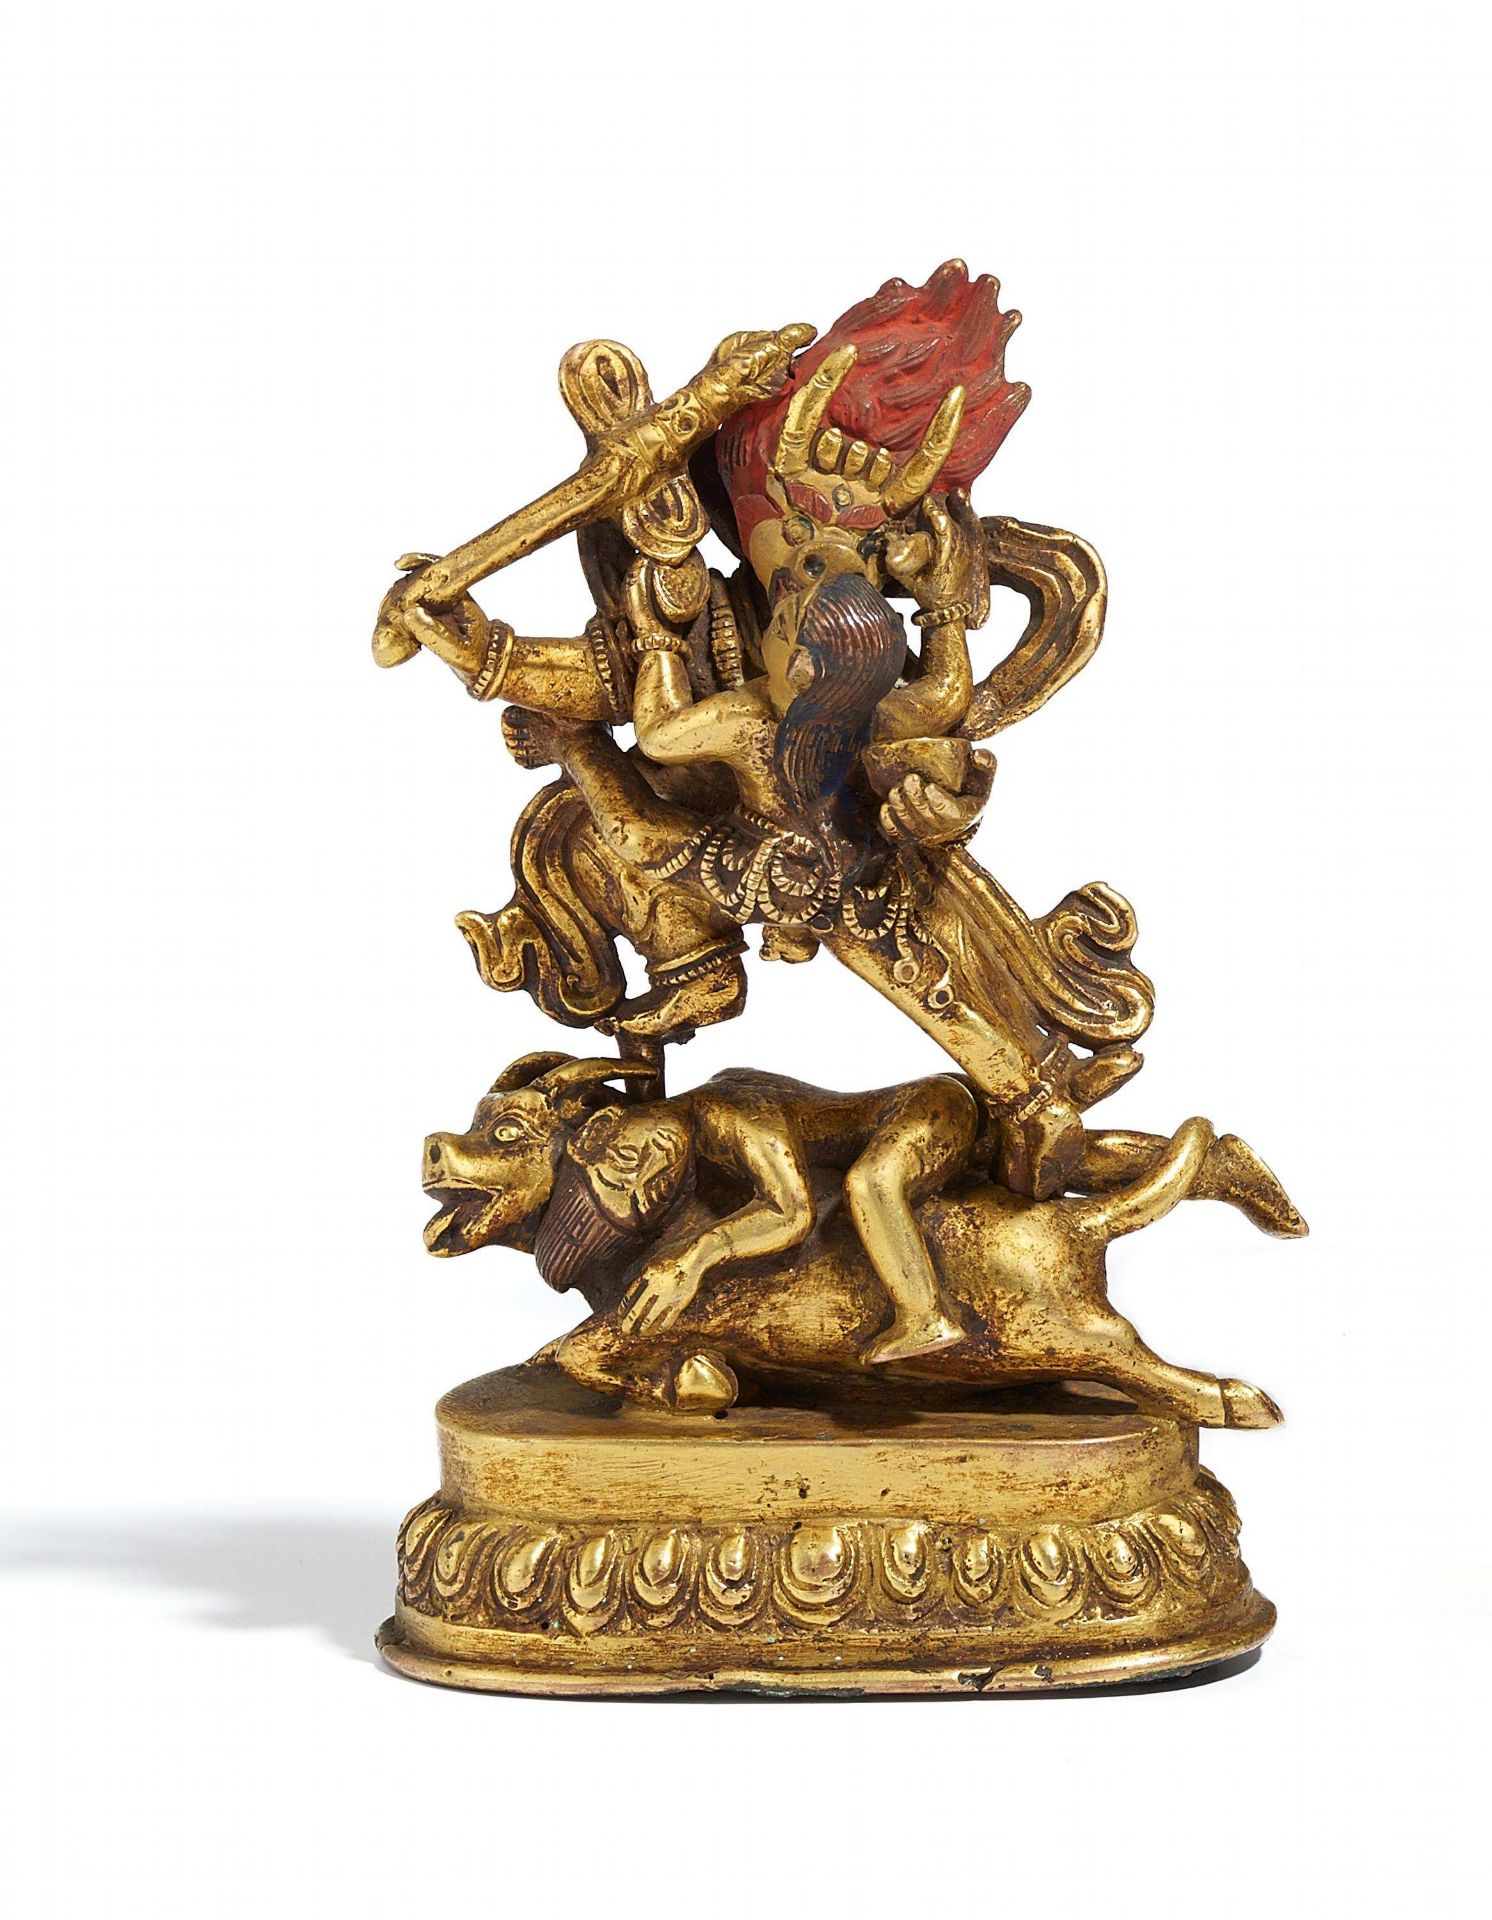 YAMA WITH YAMUNA. Tibet. 18th/19th c. Brass with fire gilding, painted with pigments and gold.